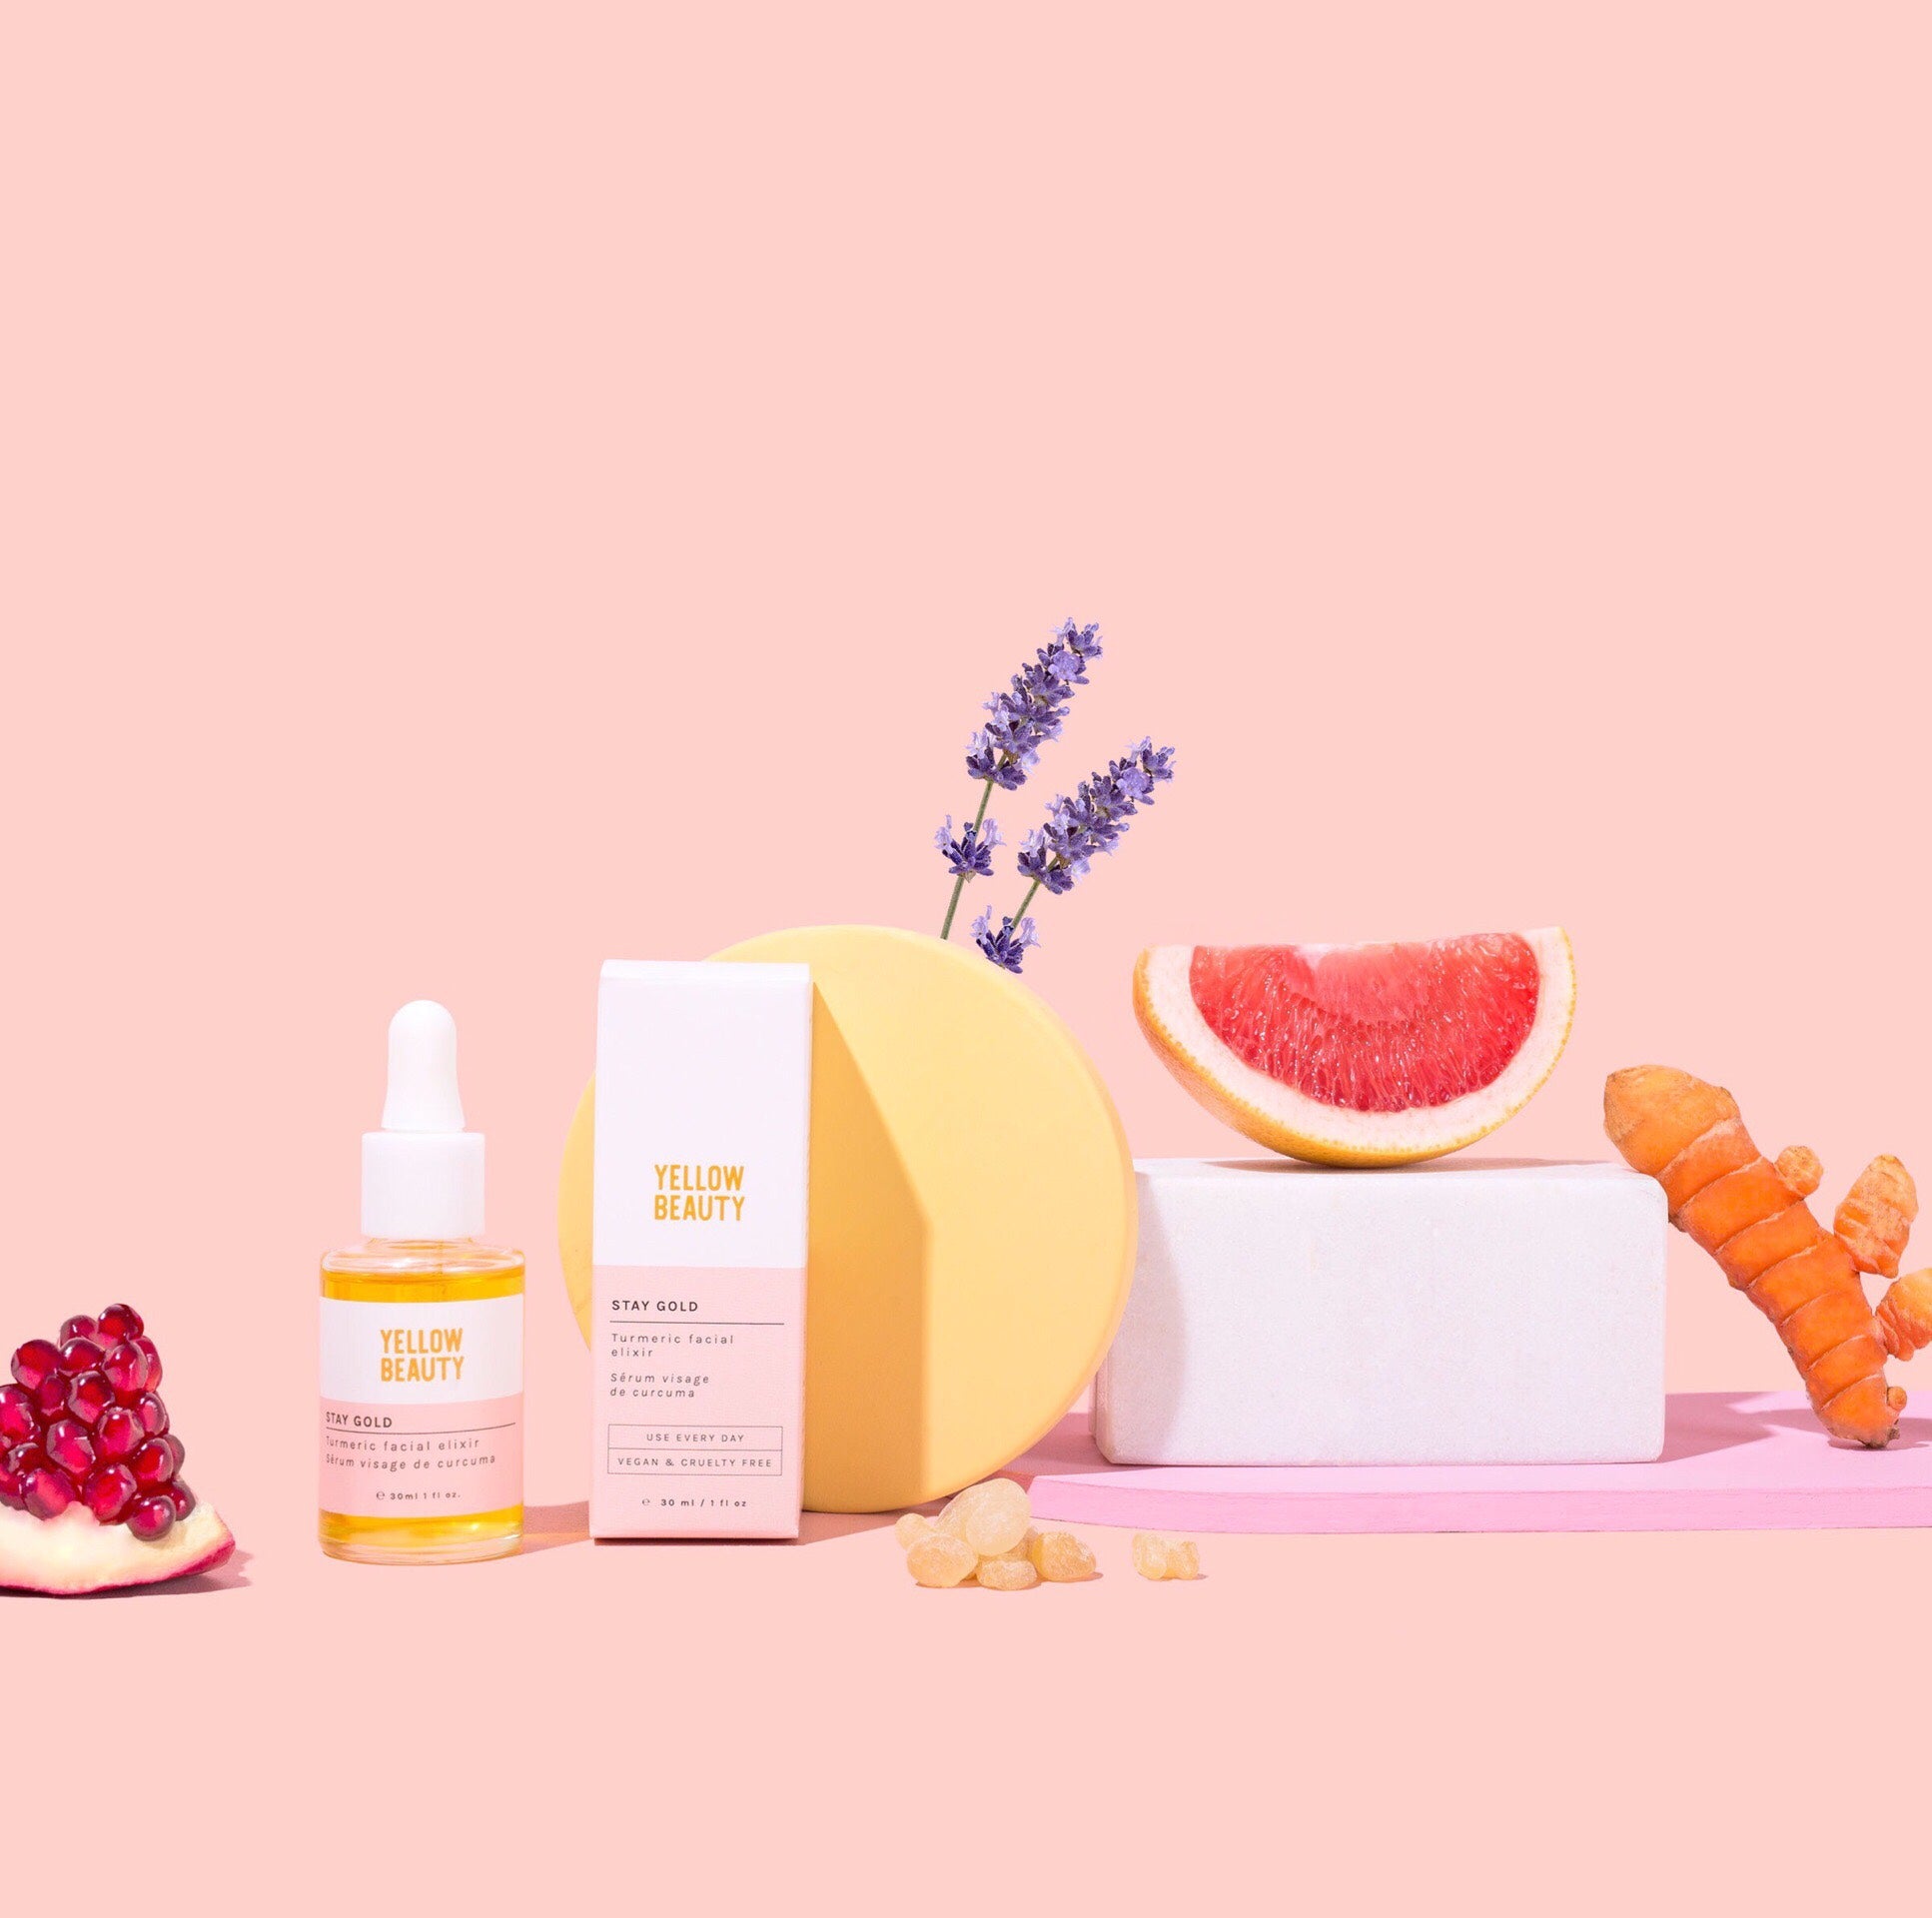 A selection of natural skincare products by Yellow beauty that are vegan and cruelty free.